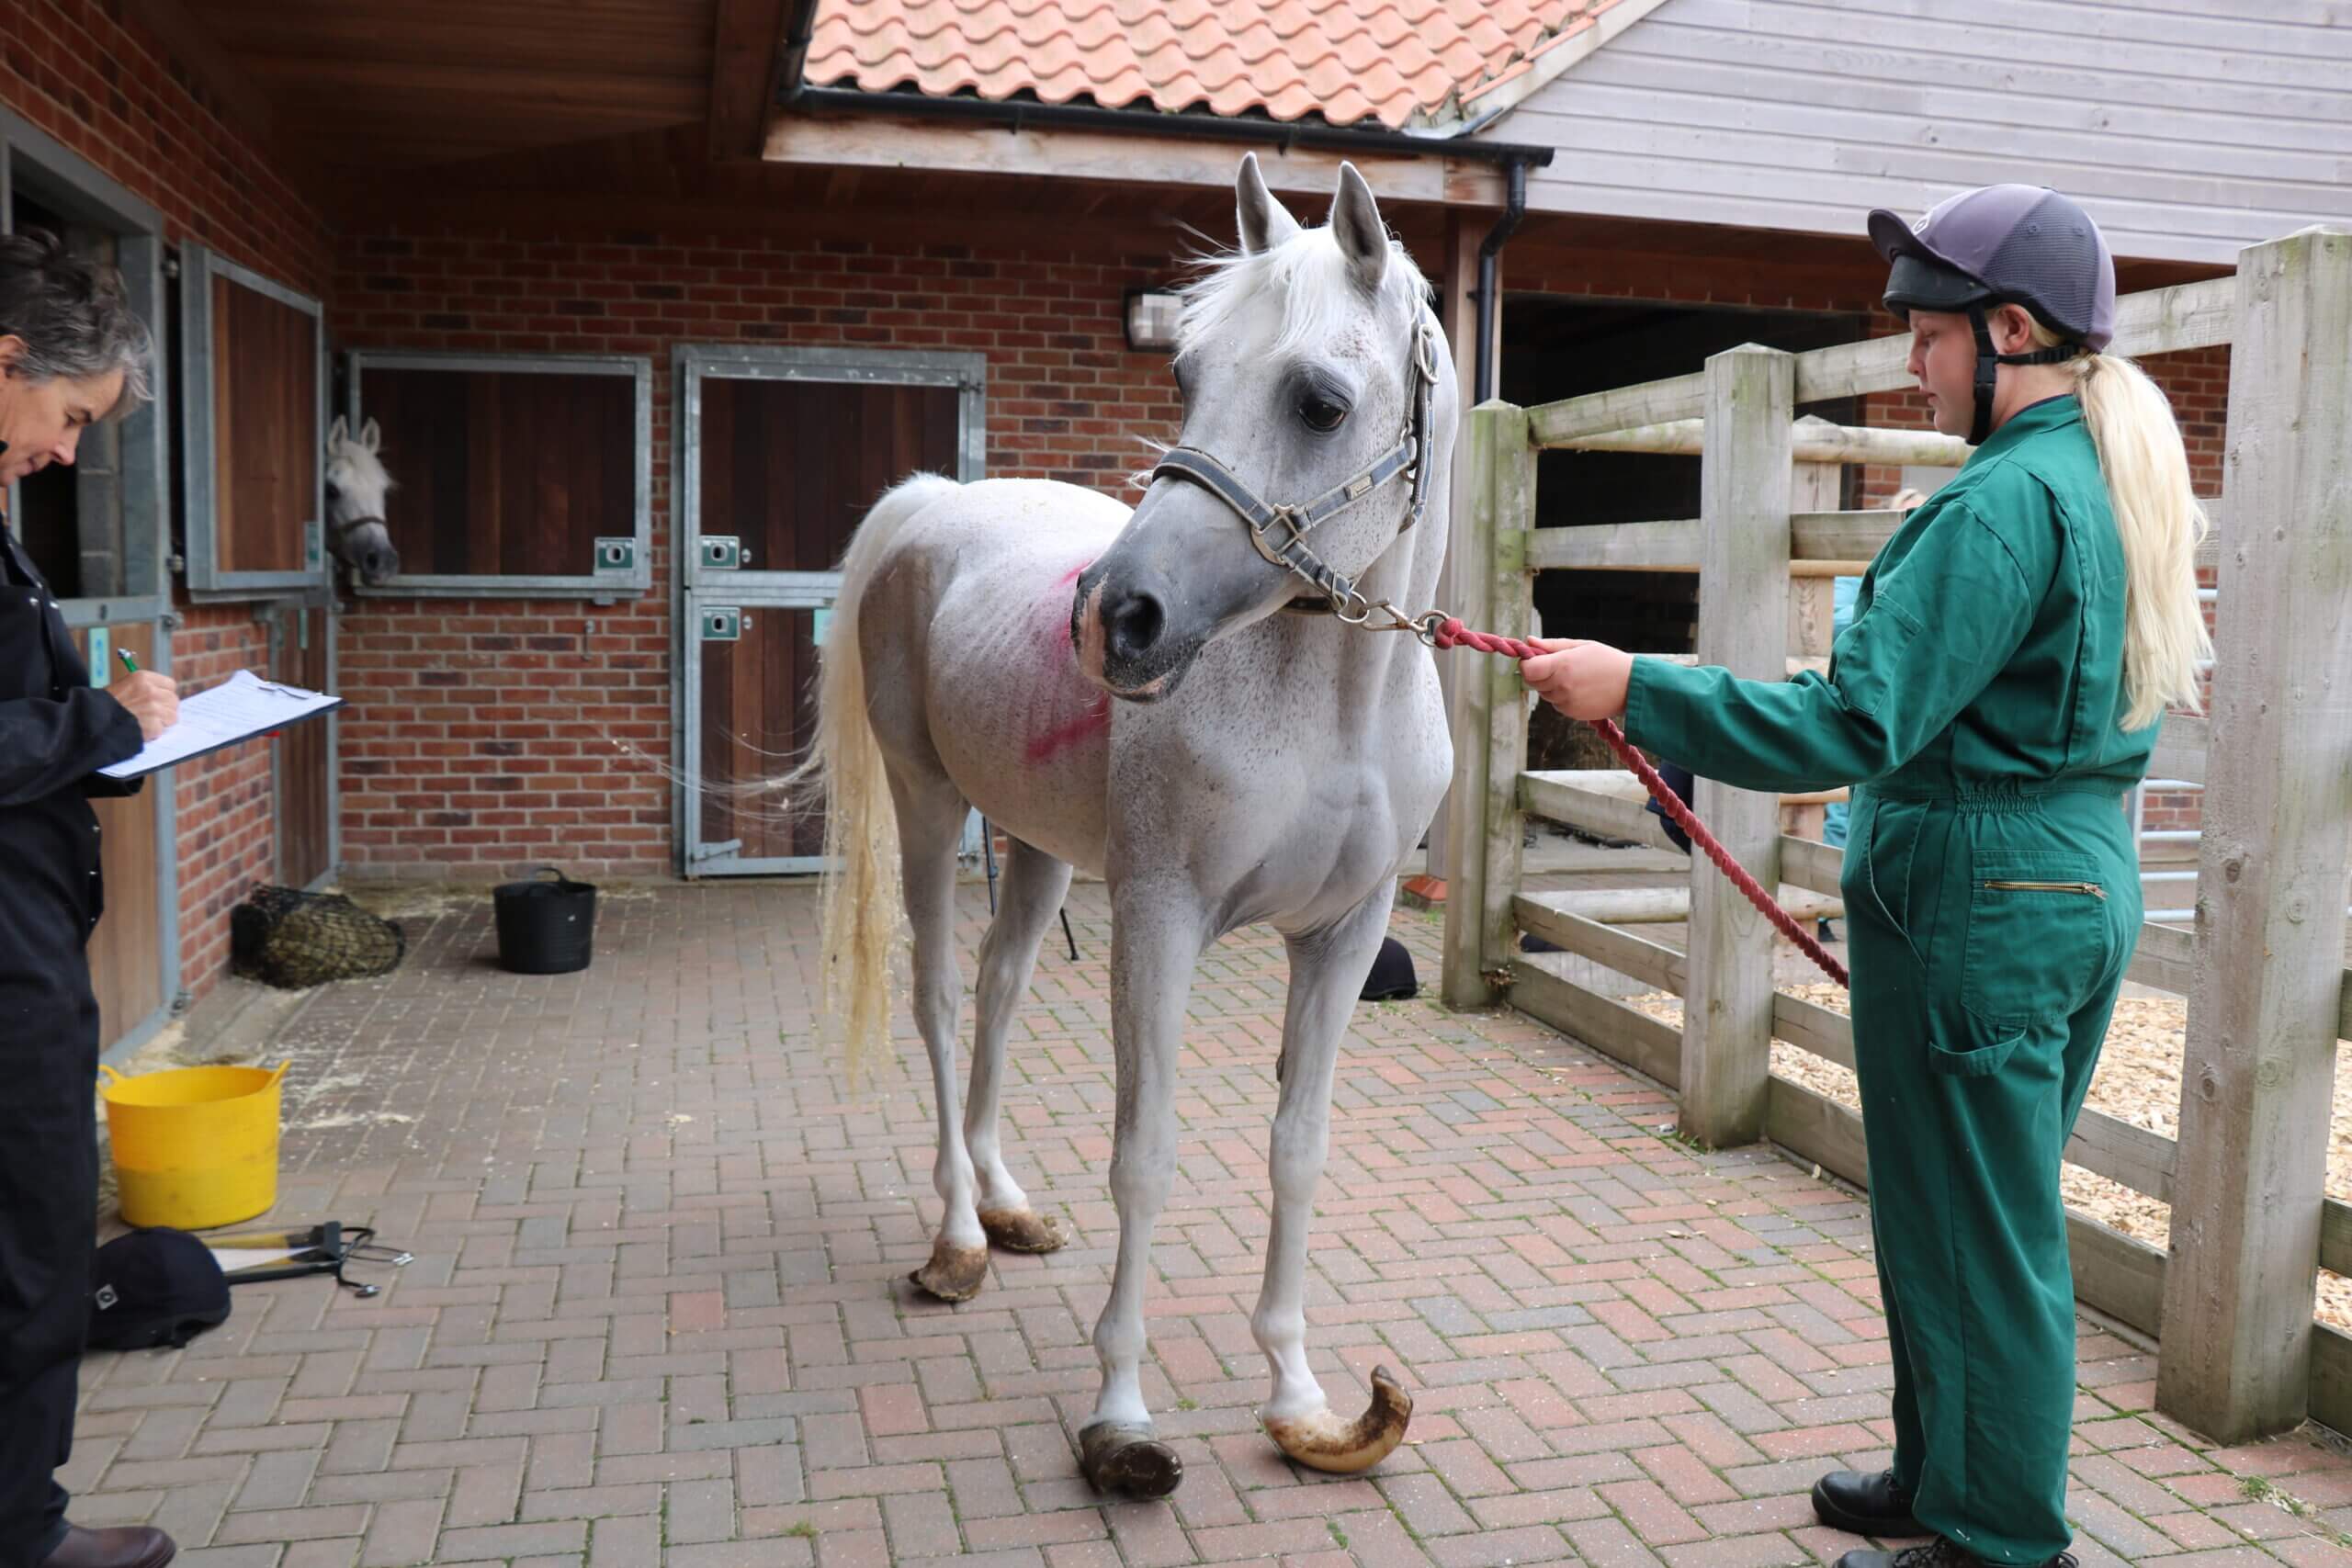 neglected grey arab with visible ribs and severely overgrown hooves being held by a member of staff, after rescue